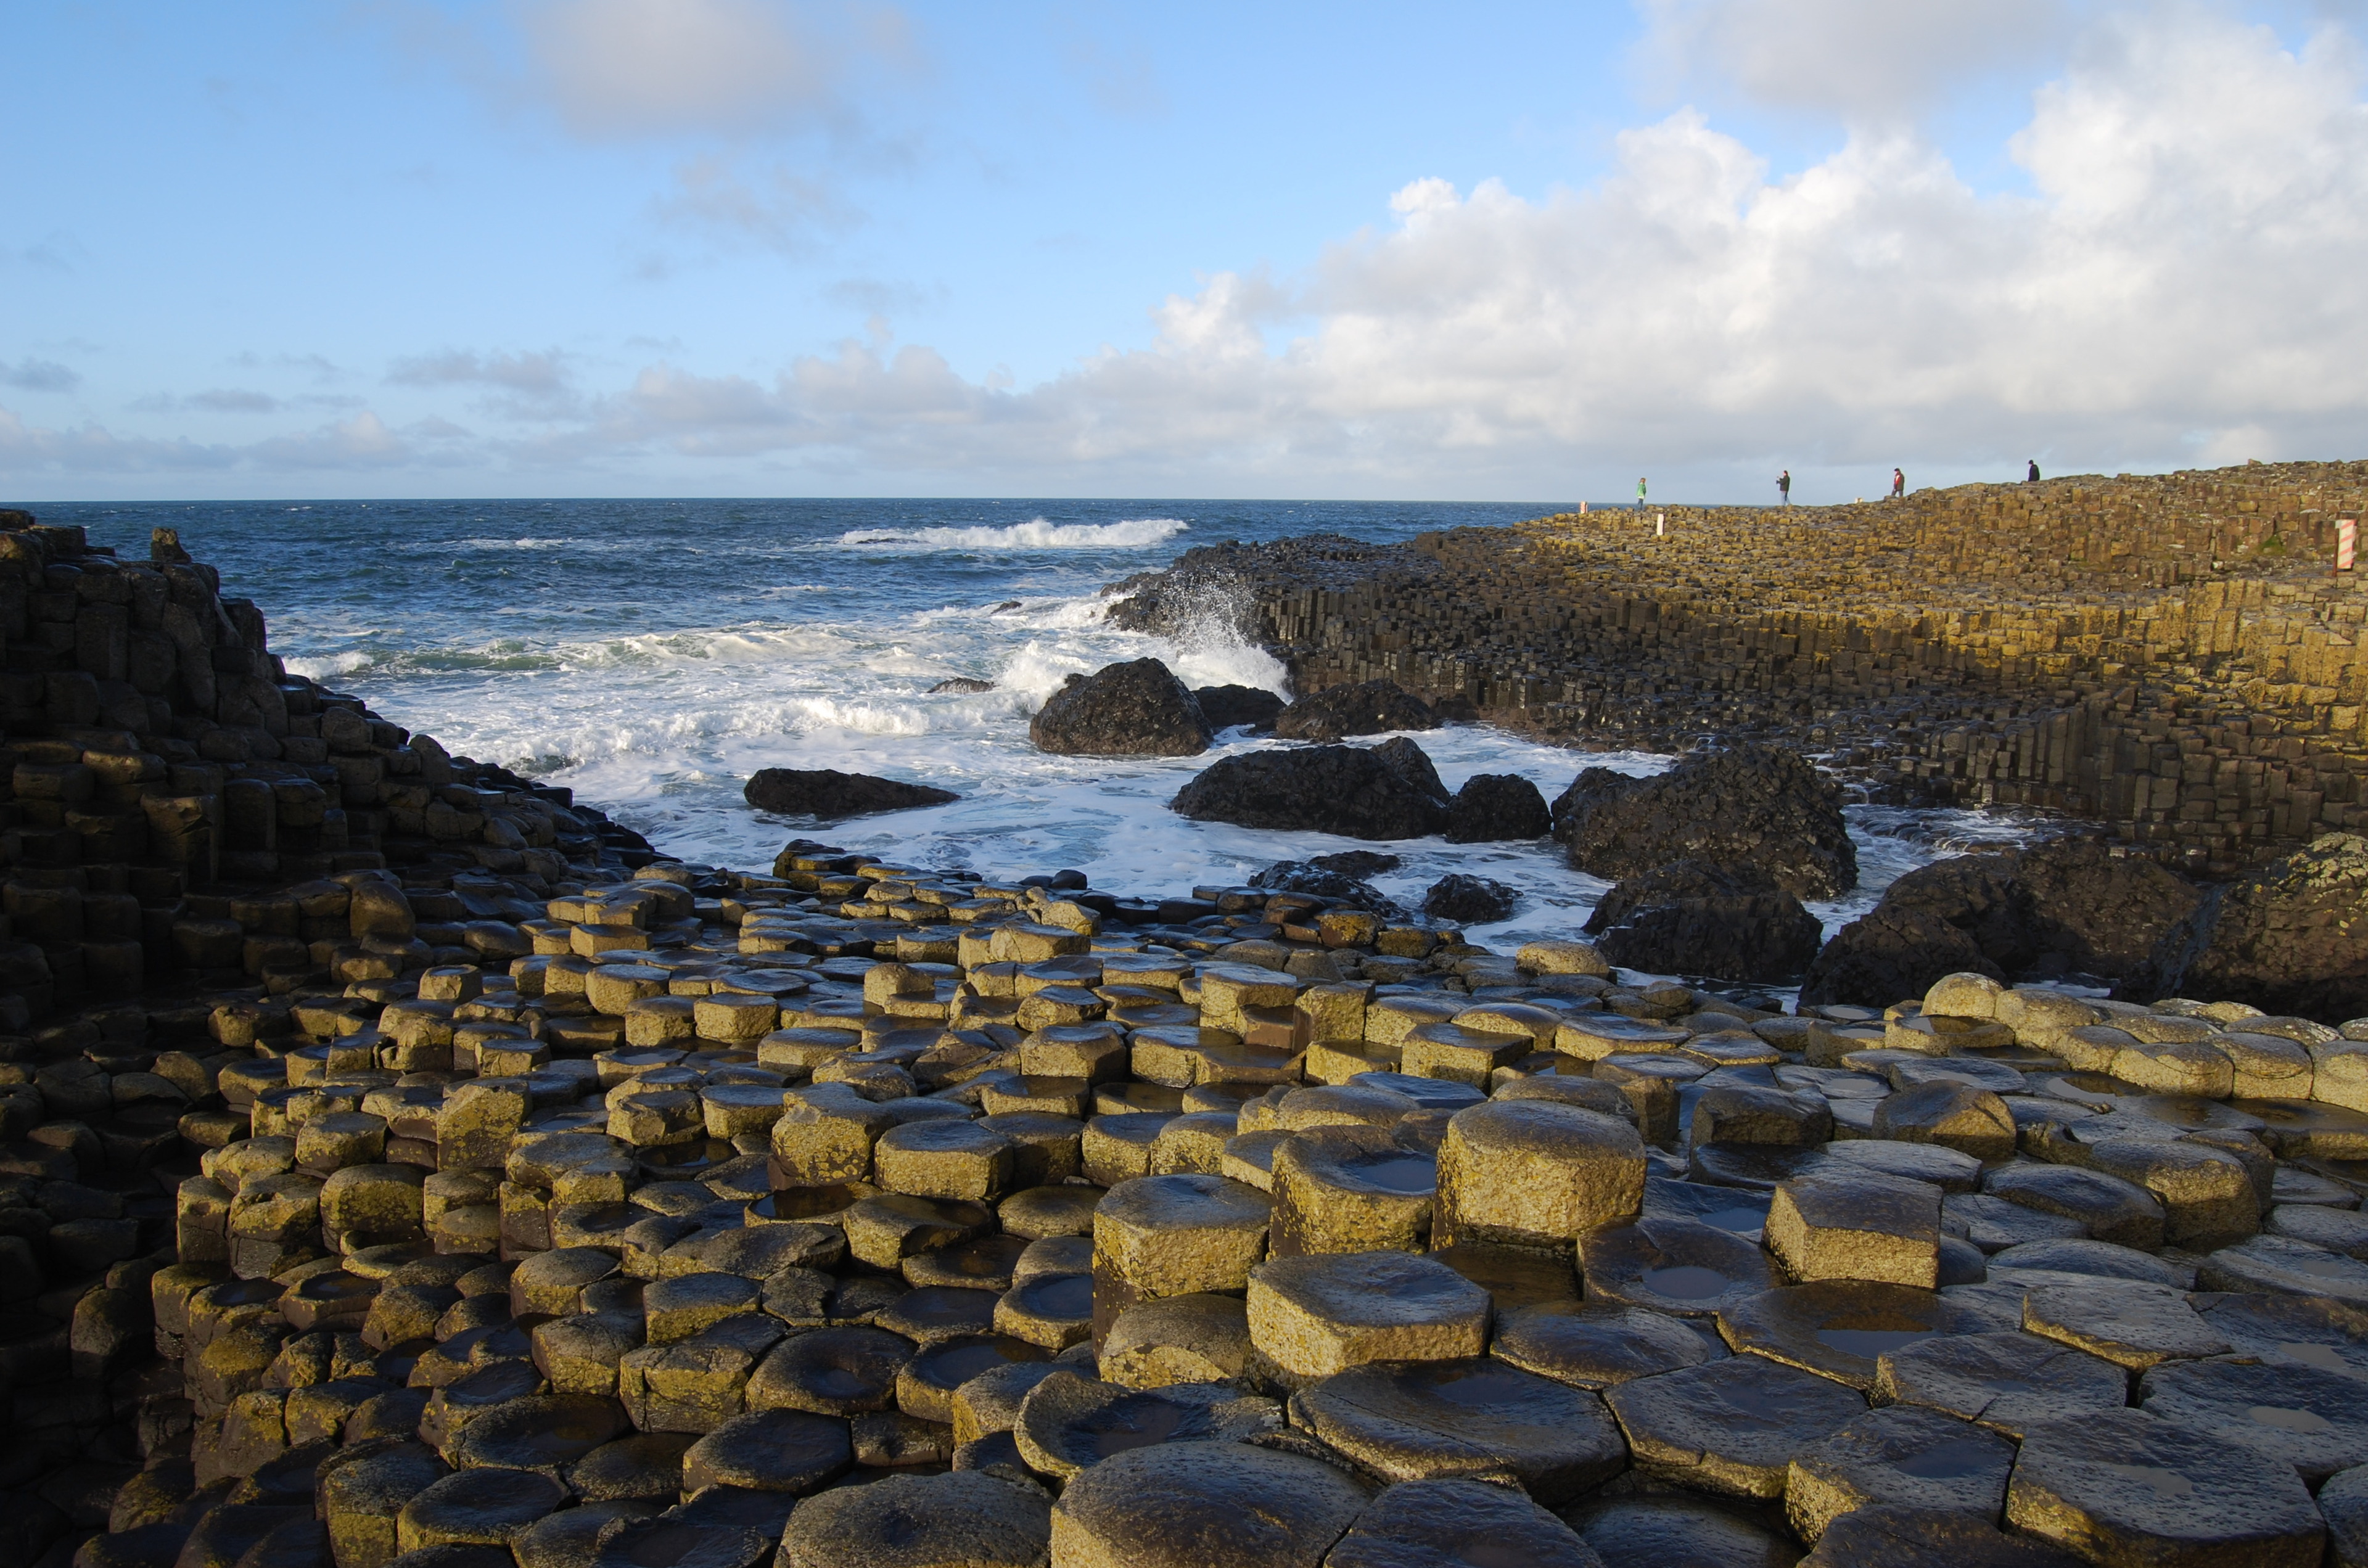 Researchers have figured out how the Giant's Causeway came to be